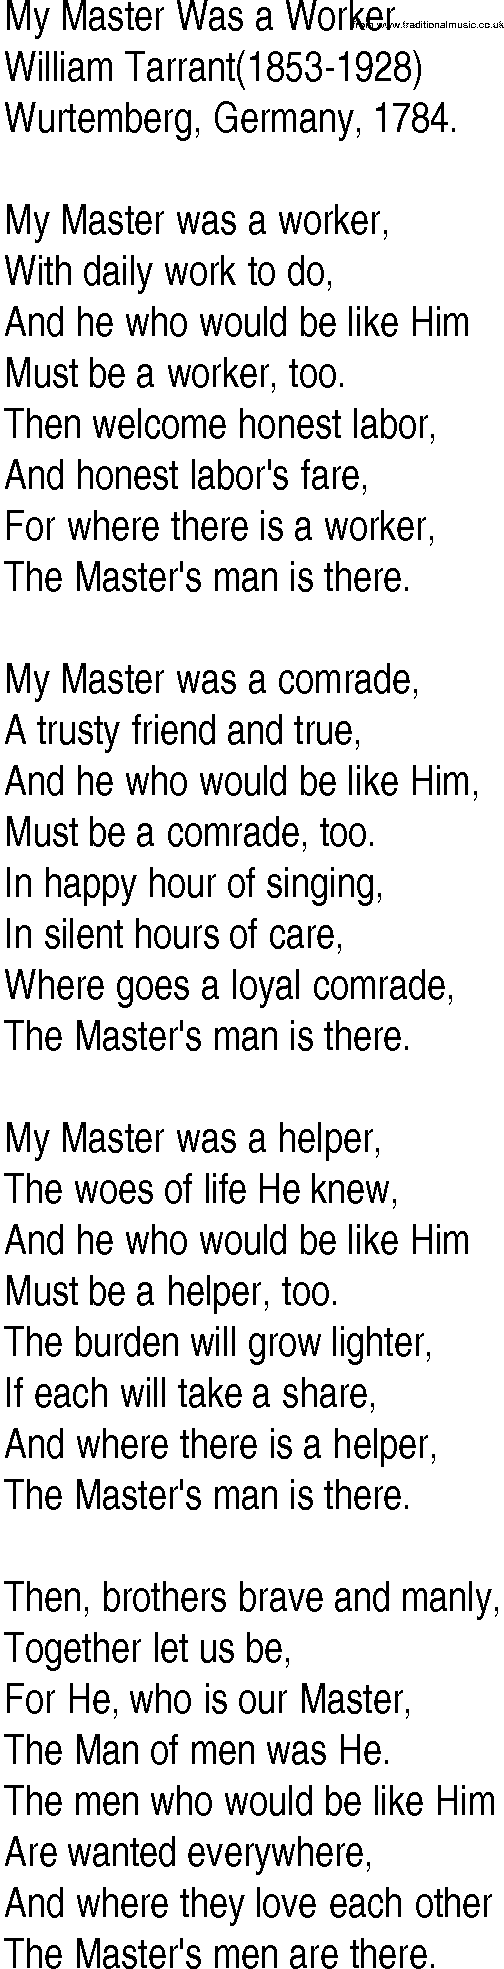 Hymn and Gospel Song: My Master Was a Worker by William Tarrant lyrics